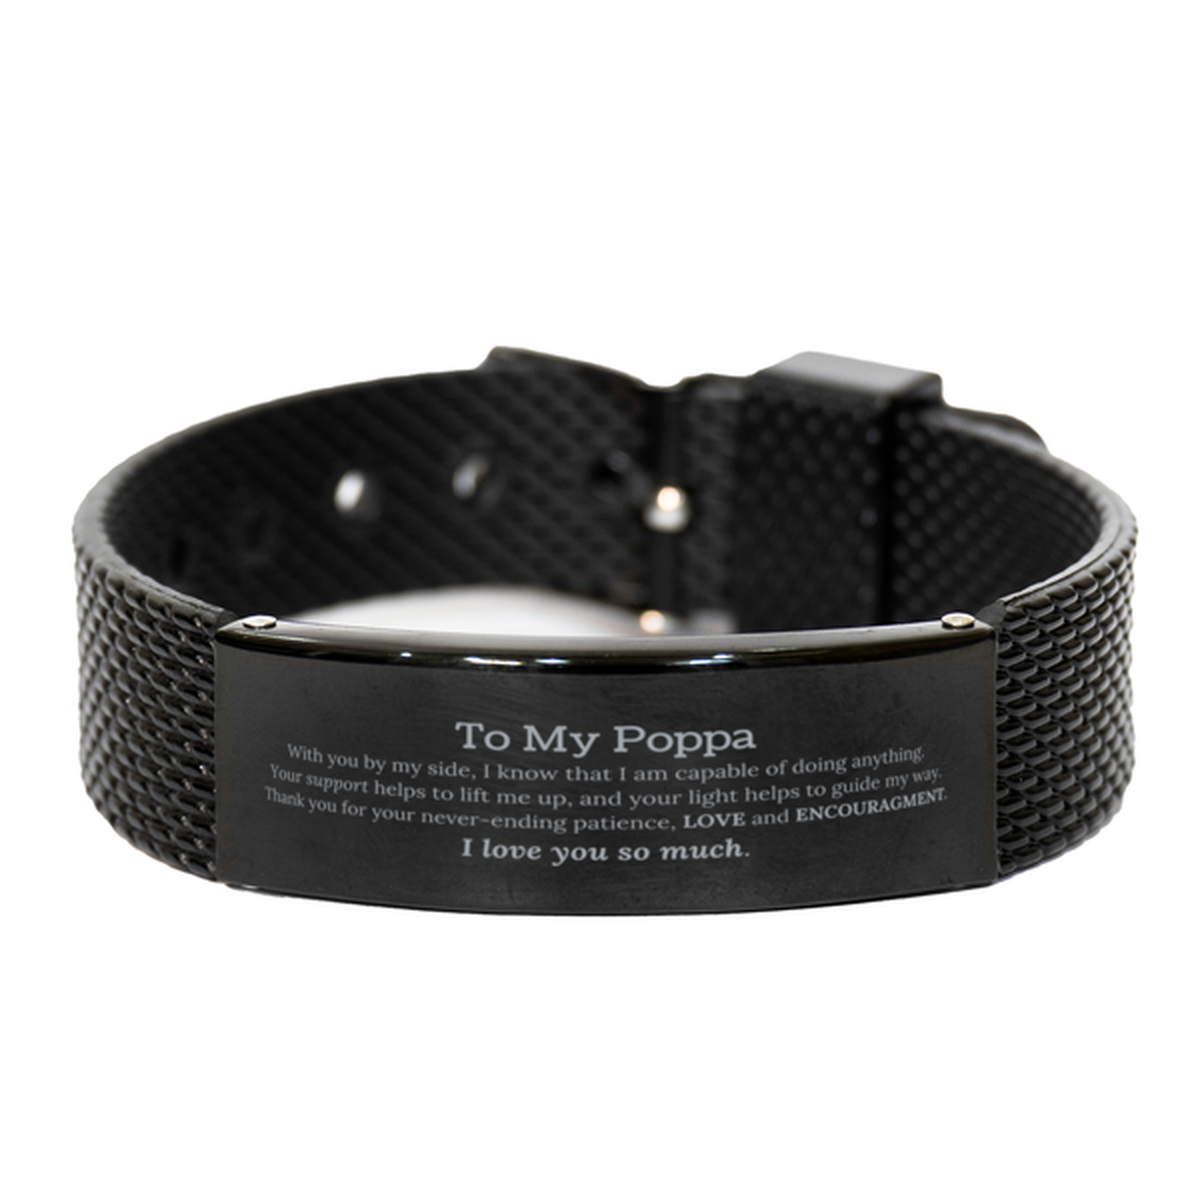 Appreciation Poppa Black Shark Mesh Bracelet Gifts, To My Poppa Birthday Christmas Wedding Keepsake Gifts for Poppa With you by my side, I know that I am capable of doing anything. I love you so much